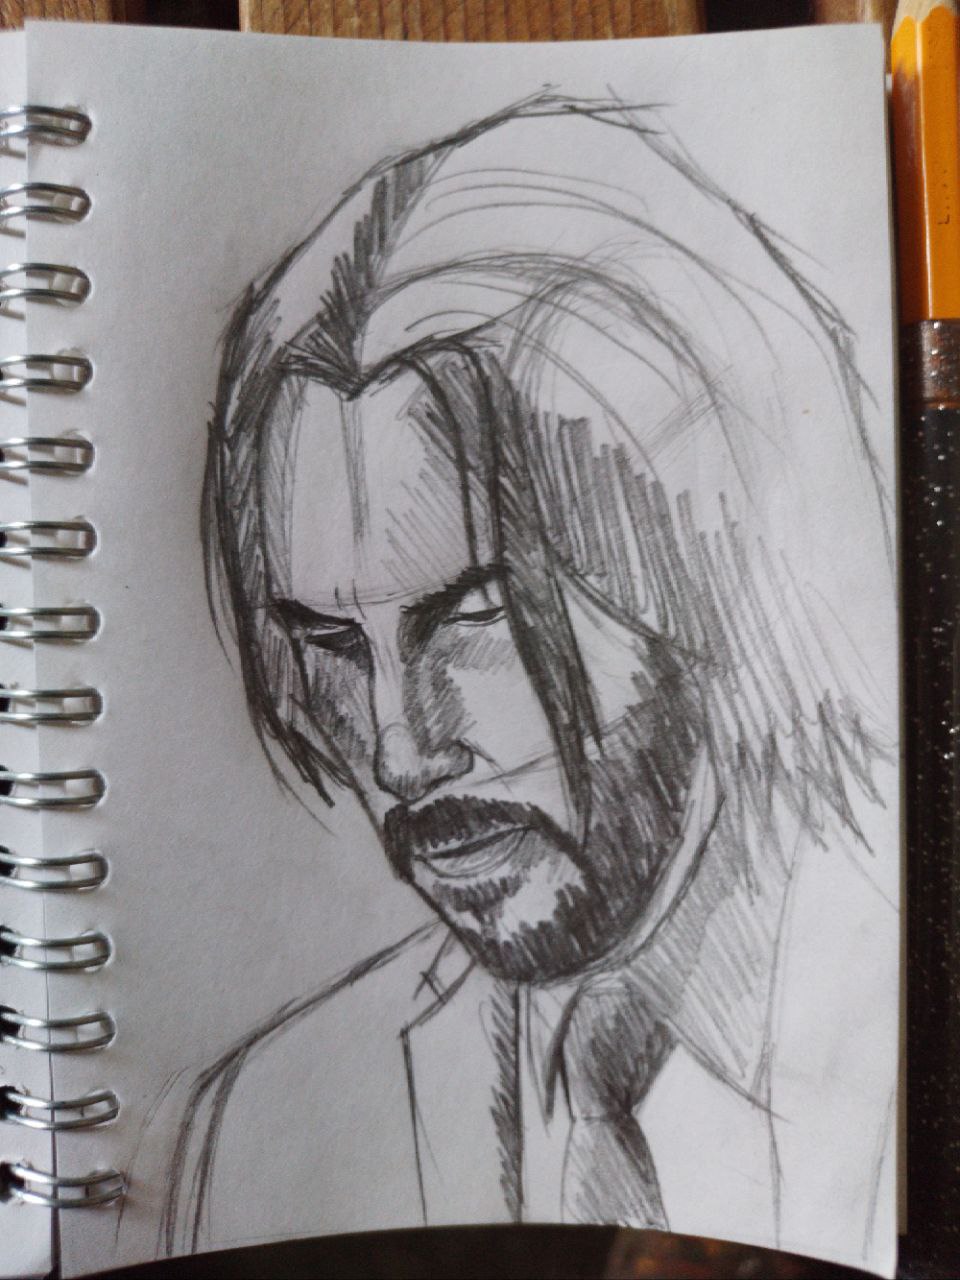 Quick drawing of John Wick Keanu Reeves  Made with a single pencil   PeakD